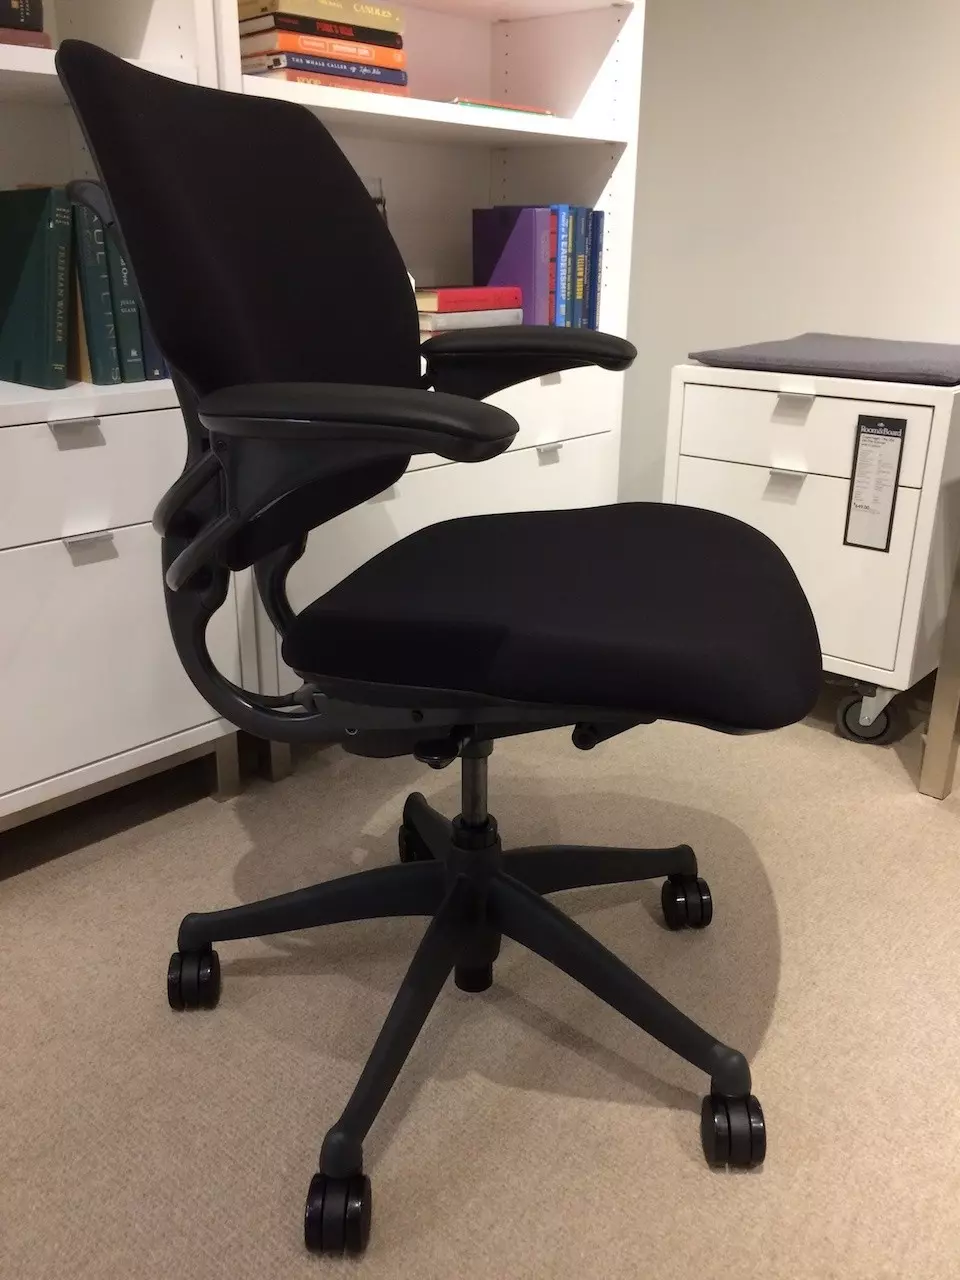 The Humanscale Freedom Chair